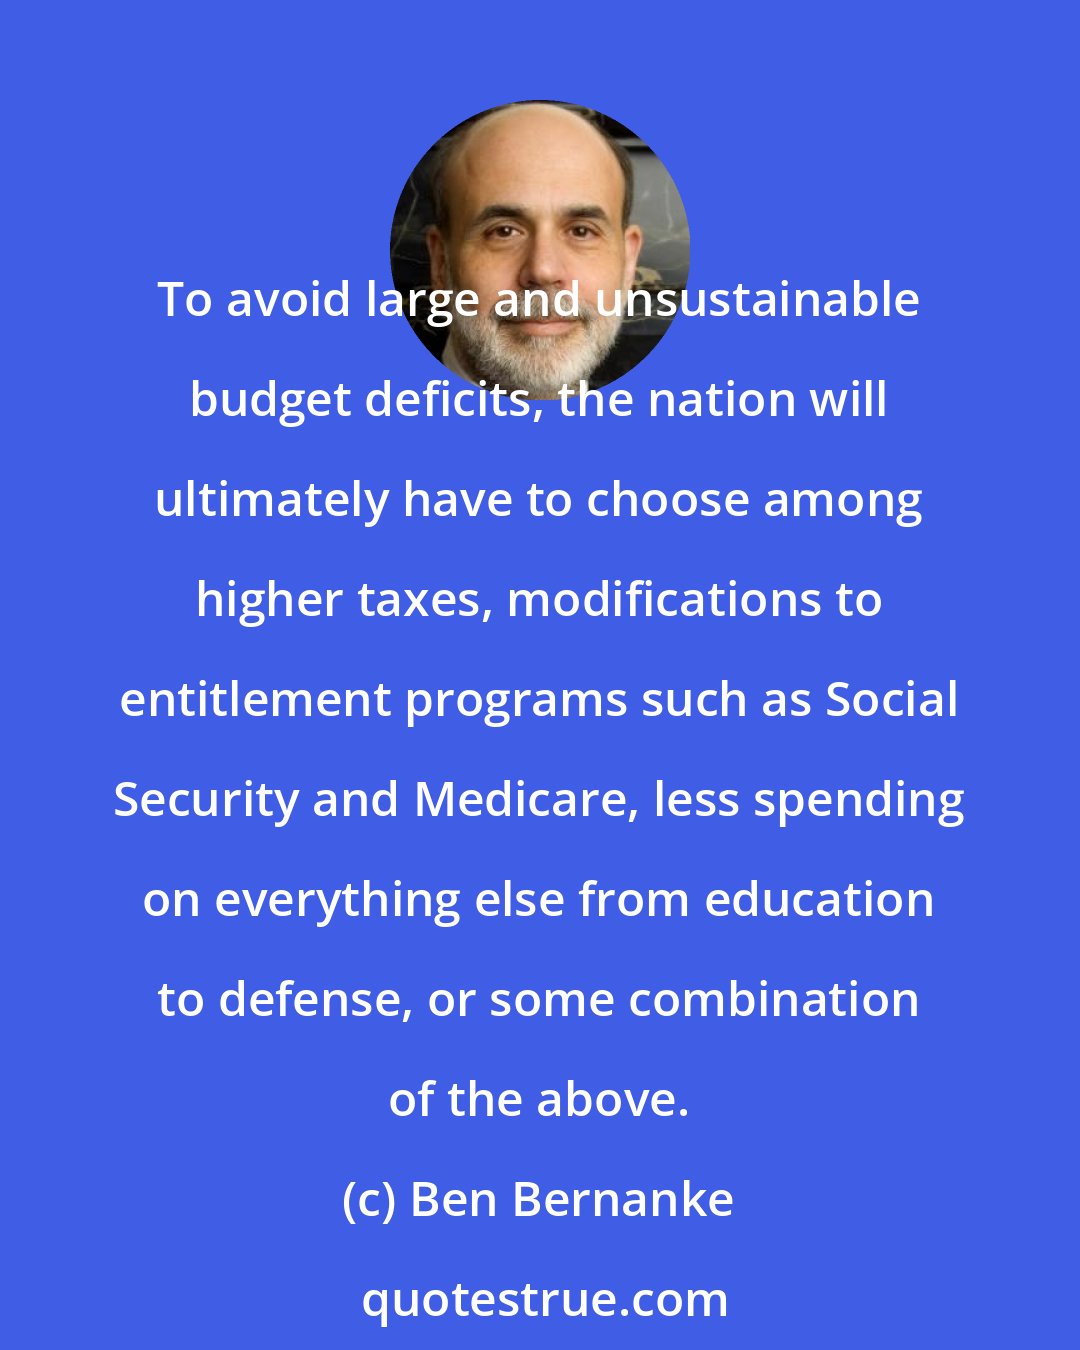 Ben Bernanke: To avoid large and unsustainable budget deficits, the nation will ultimately have to choose among higher taxes, modifications to entitlement programs such as Social Security and Medicare, less spending on everything else from education to defense, or some combination of the above.